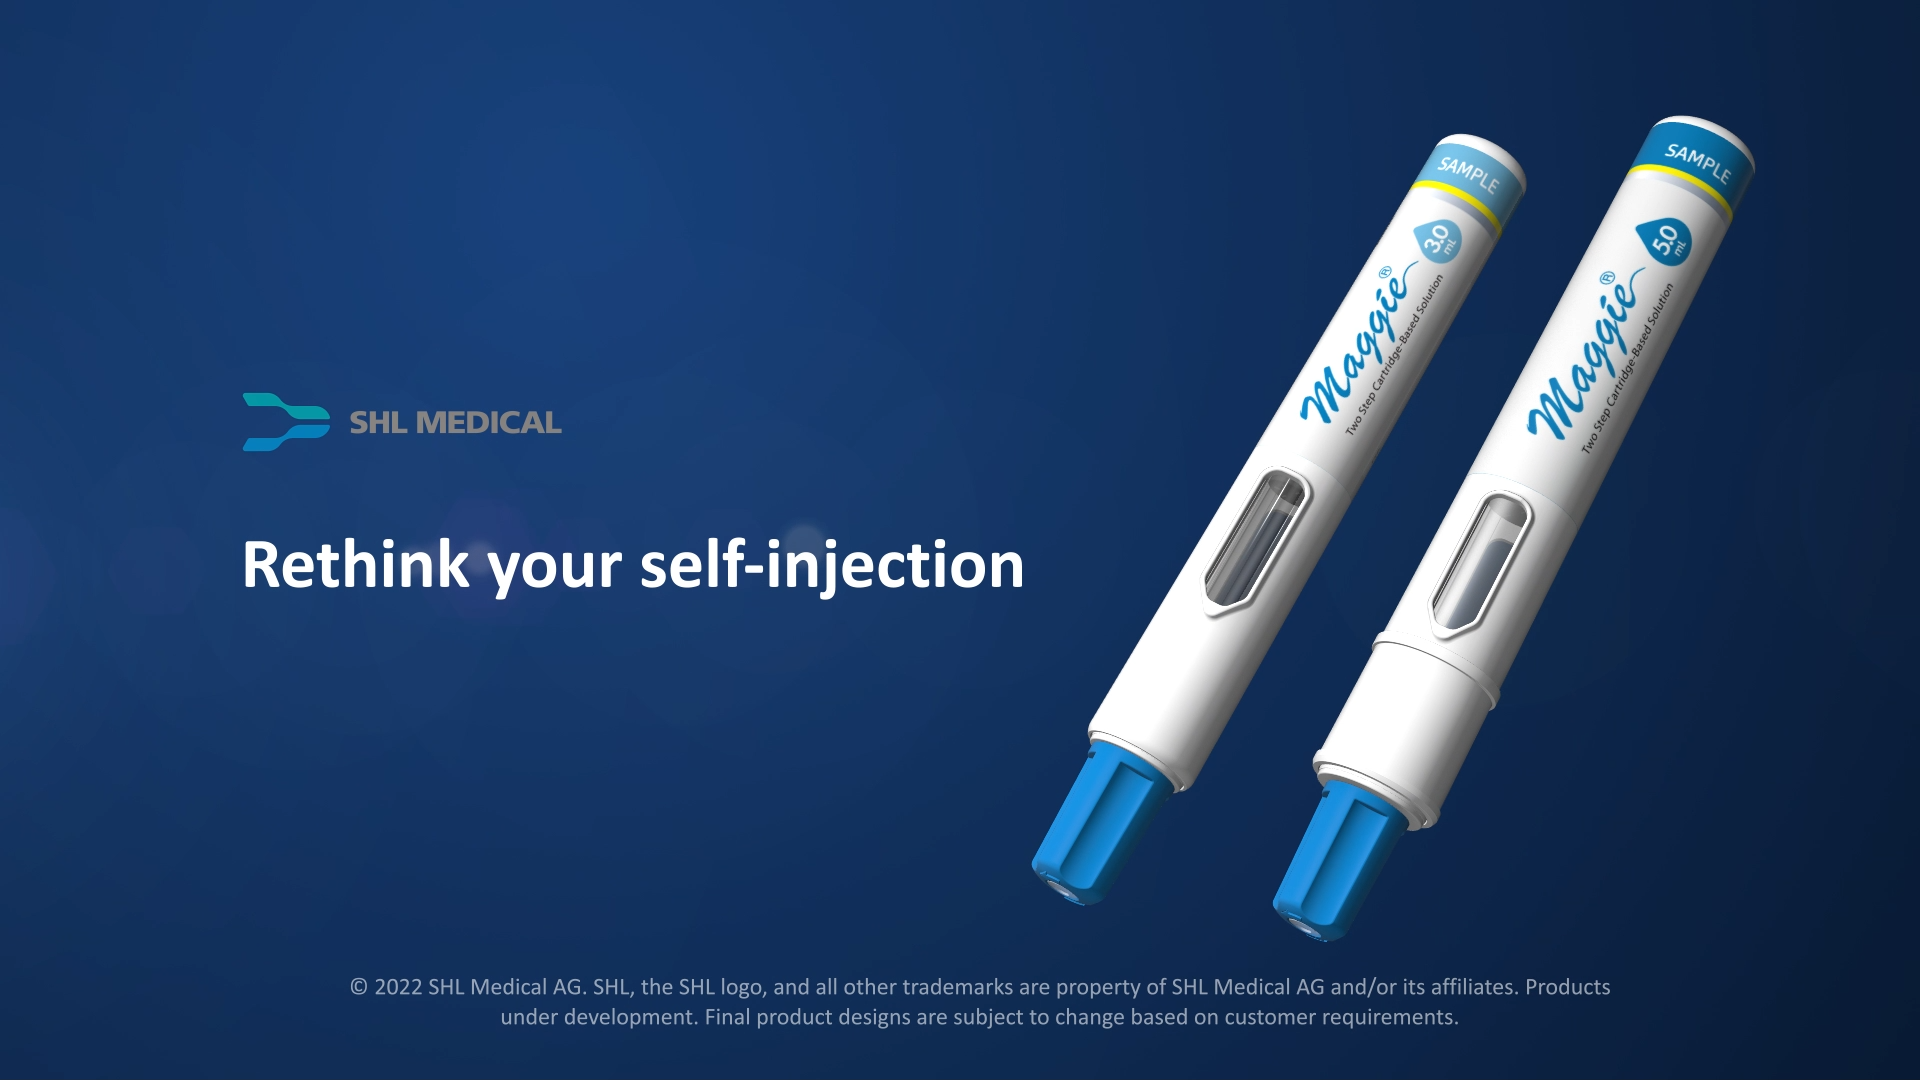 Maggie®: Rethink Your Self-Injection